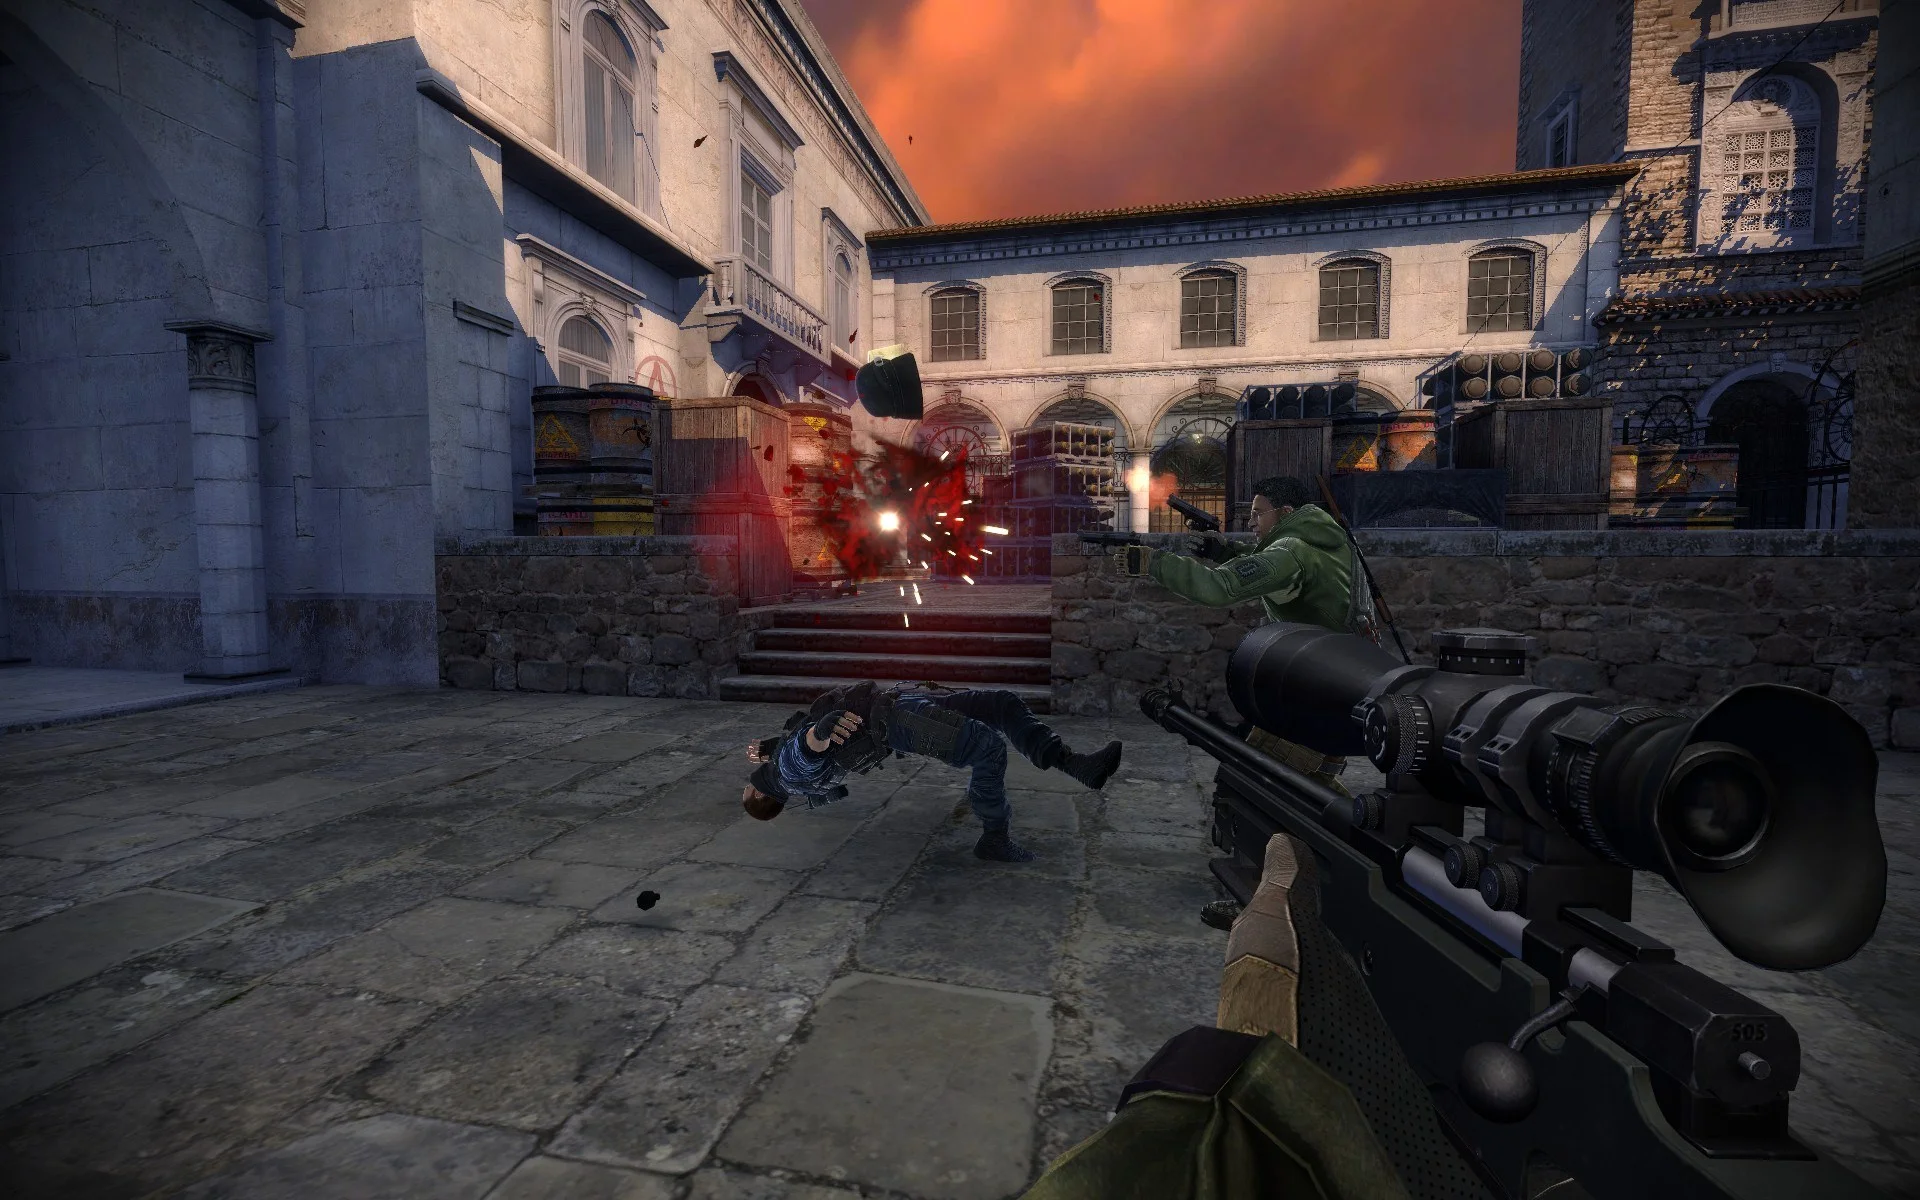 Counter-Strike 2 has a new bomb sound and clear footstep sounds